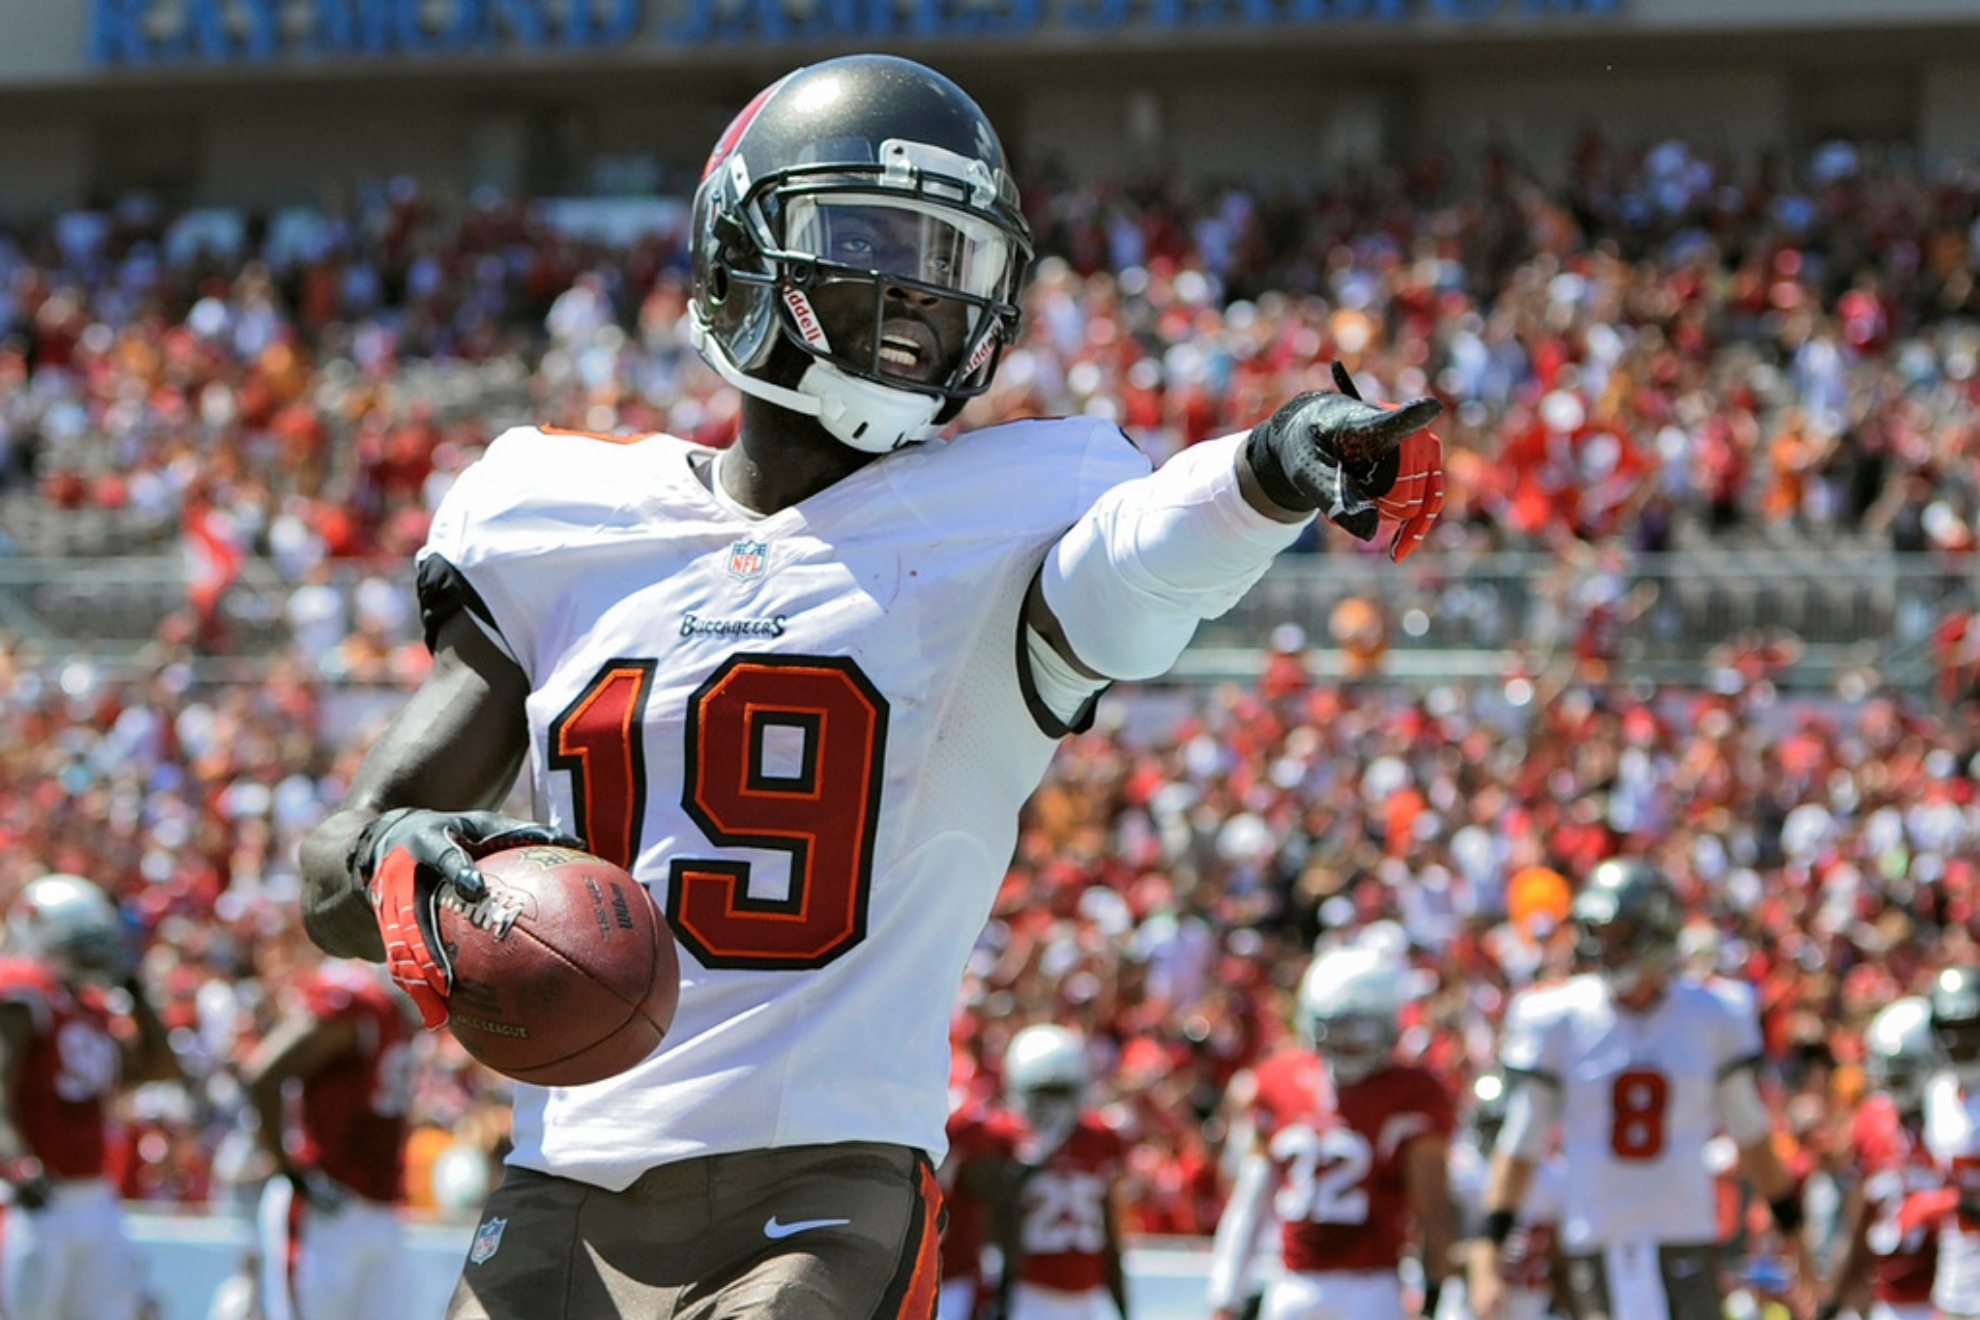 Williams was a standout with the Buccaneers